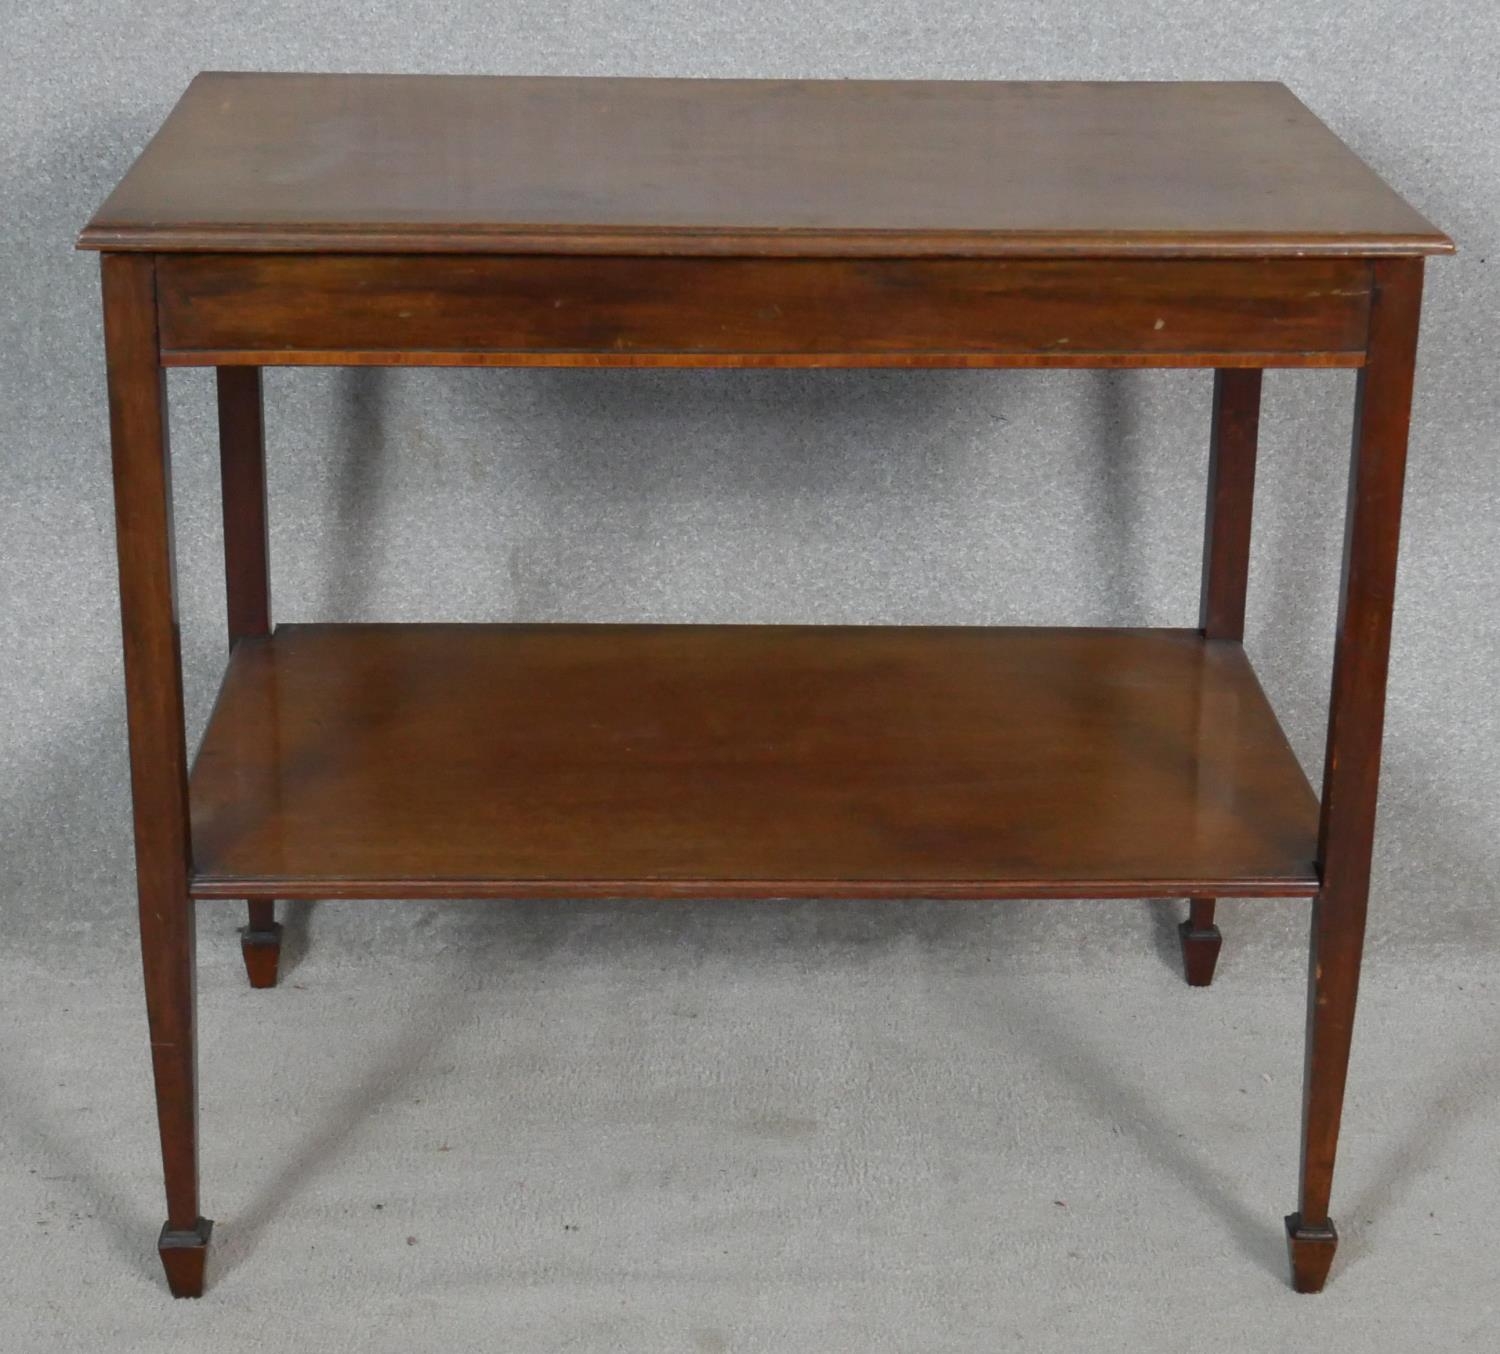 A C.1900 mahogany and satinwood inlaid two tier occasional table. H.76 L.84 W.53cm - Image 2 of 5